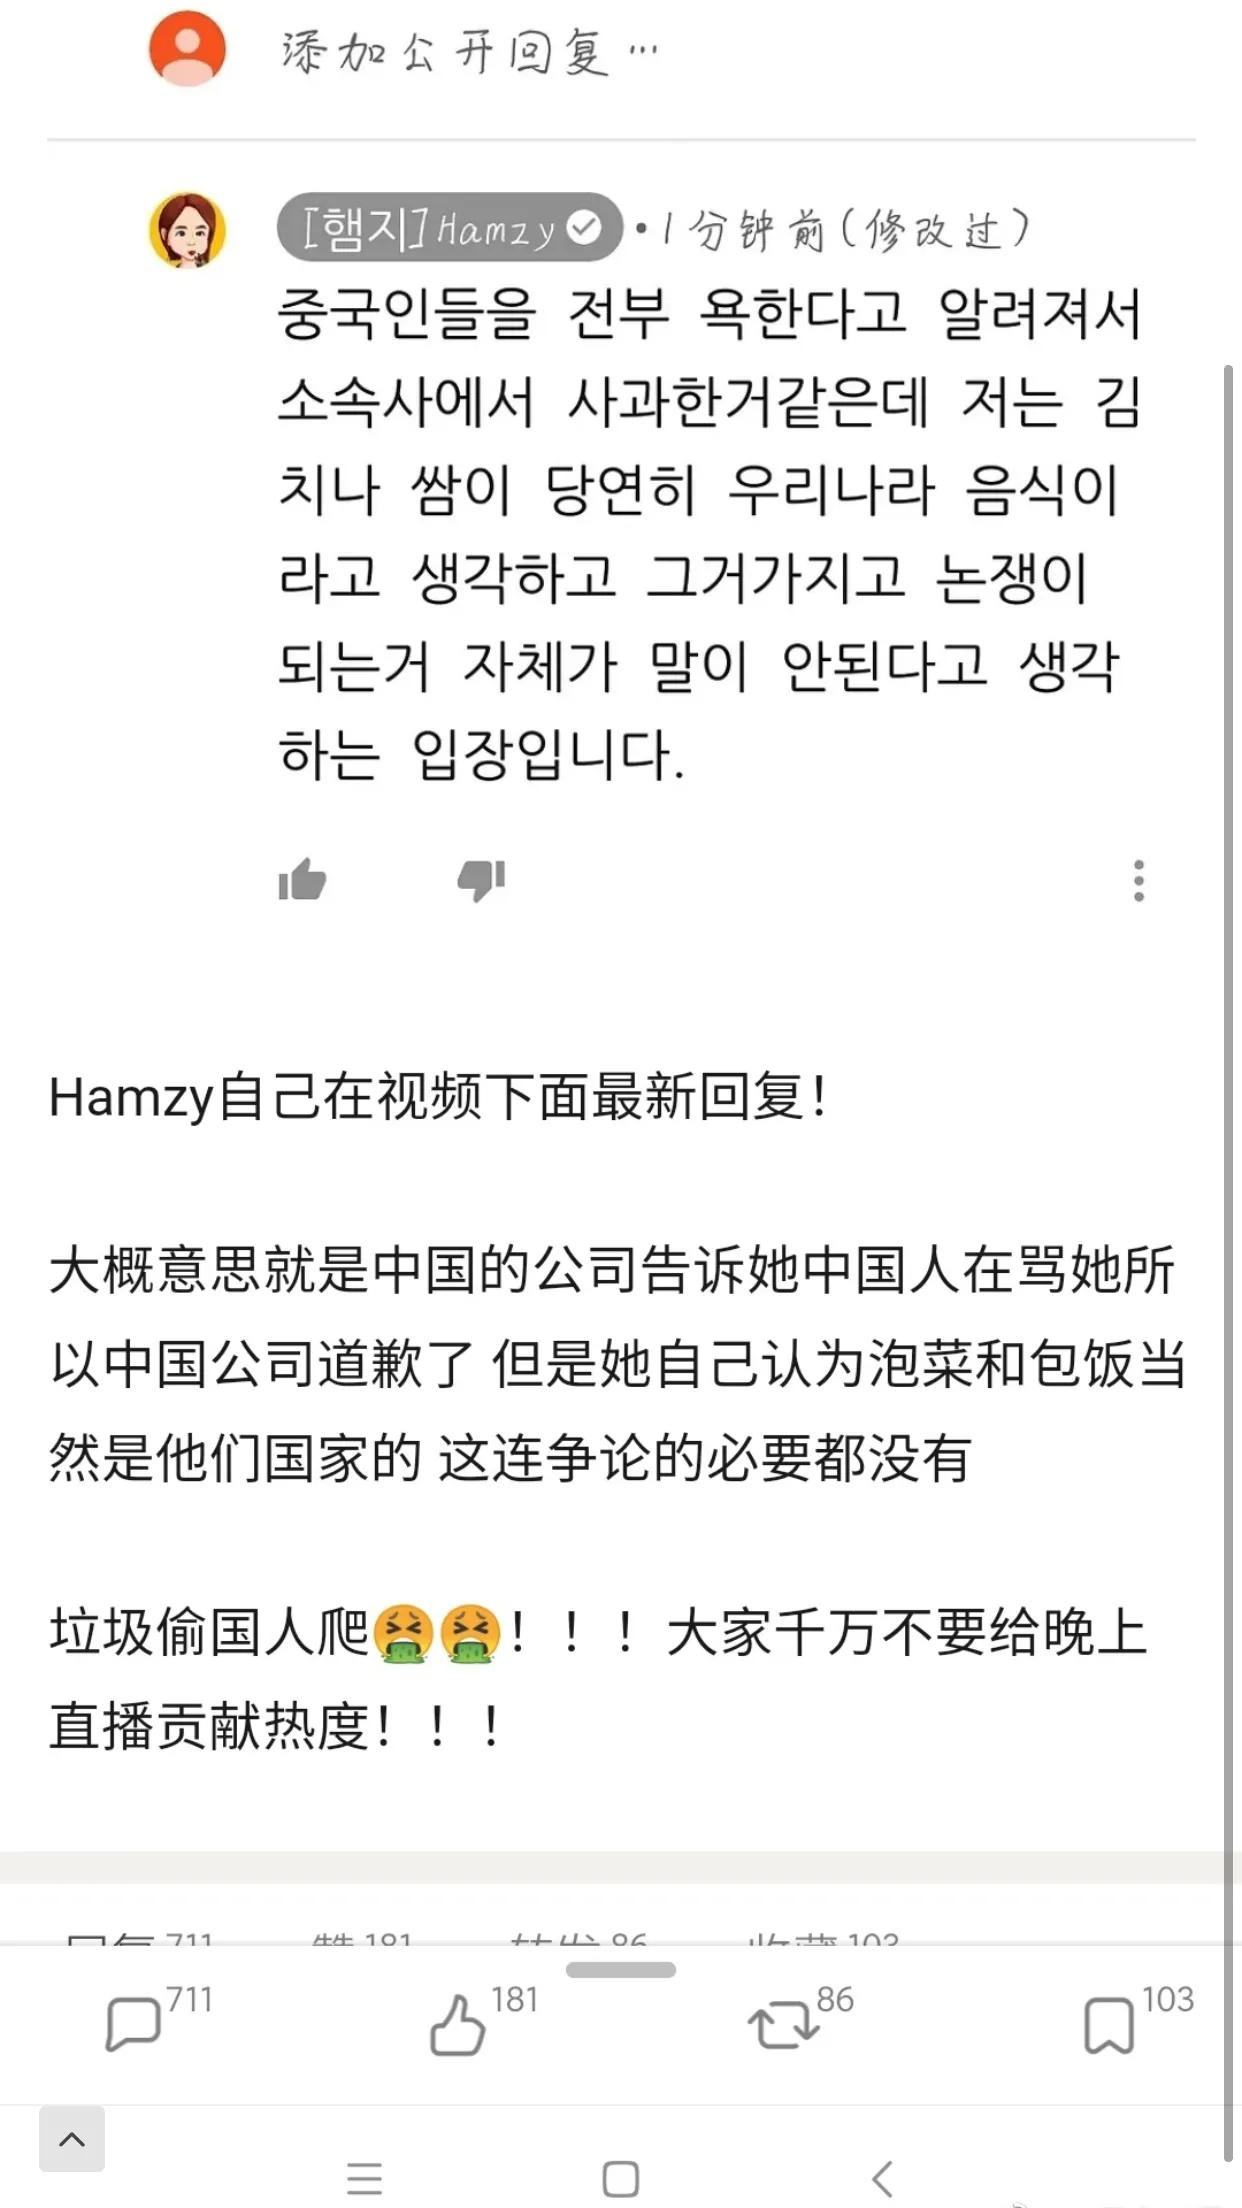 Korea eats sow Hamzy to nod assist after disgrace China is commented on, pretend to apologize to continue to scoop up gold in China